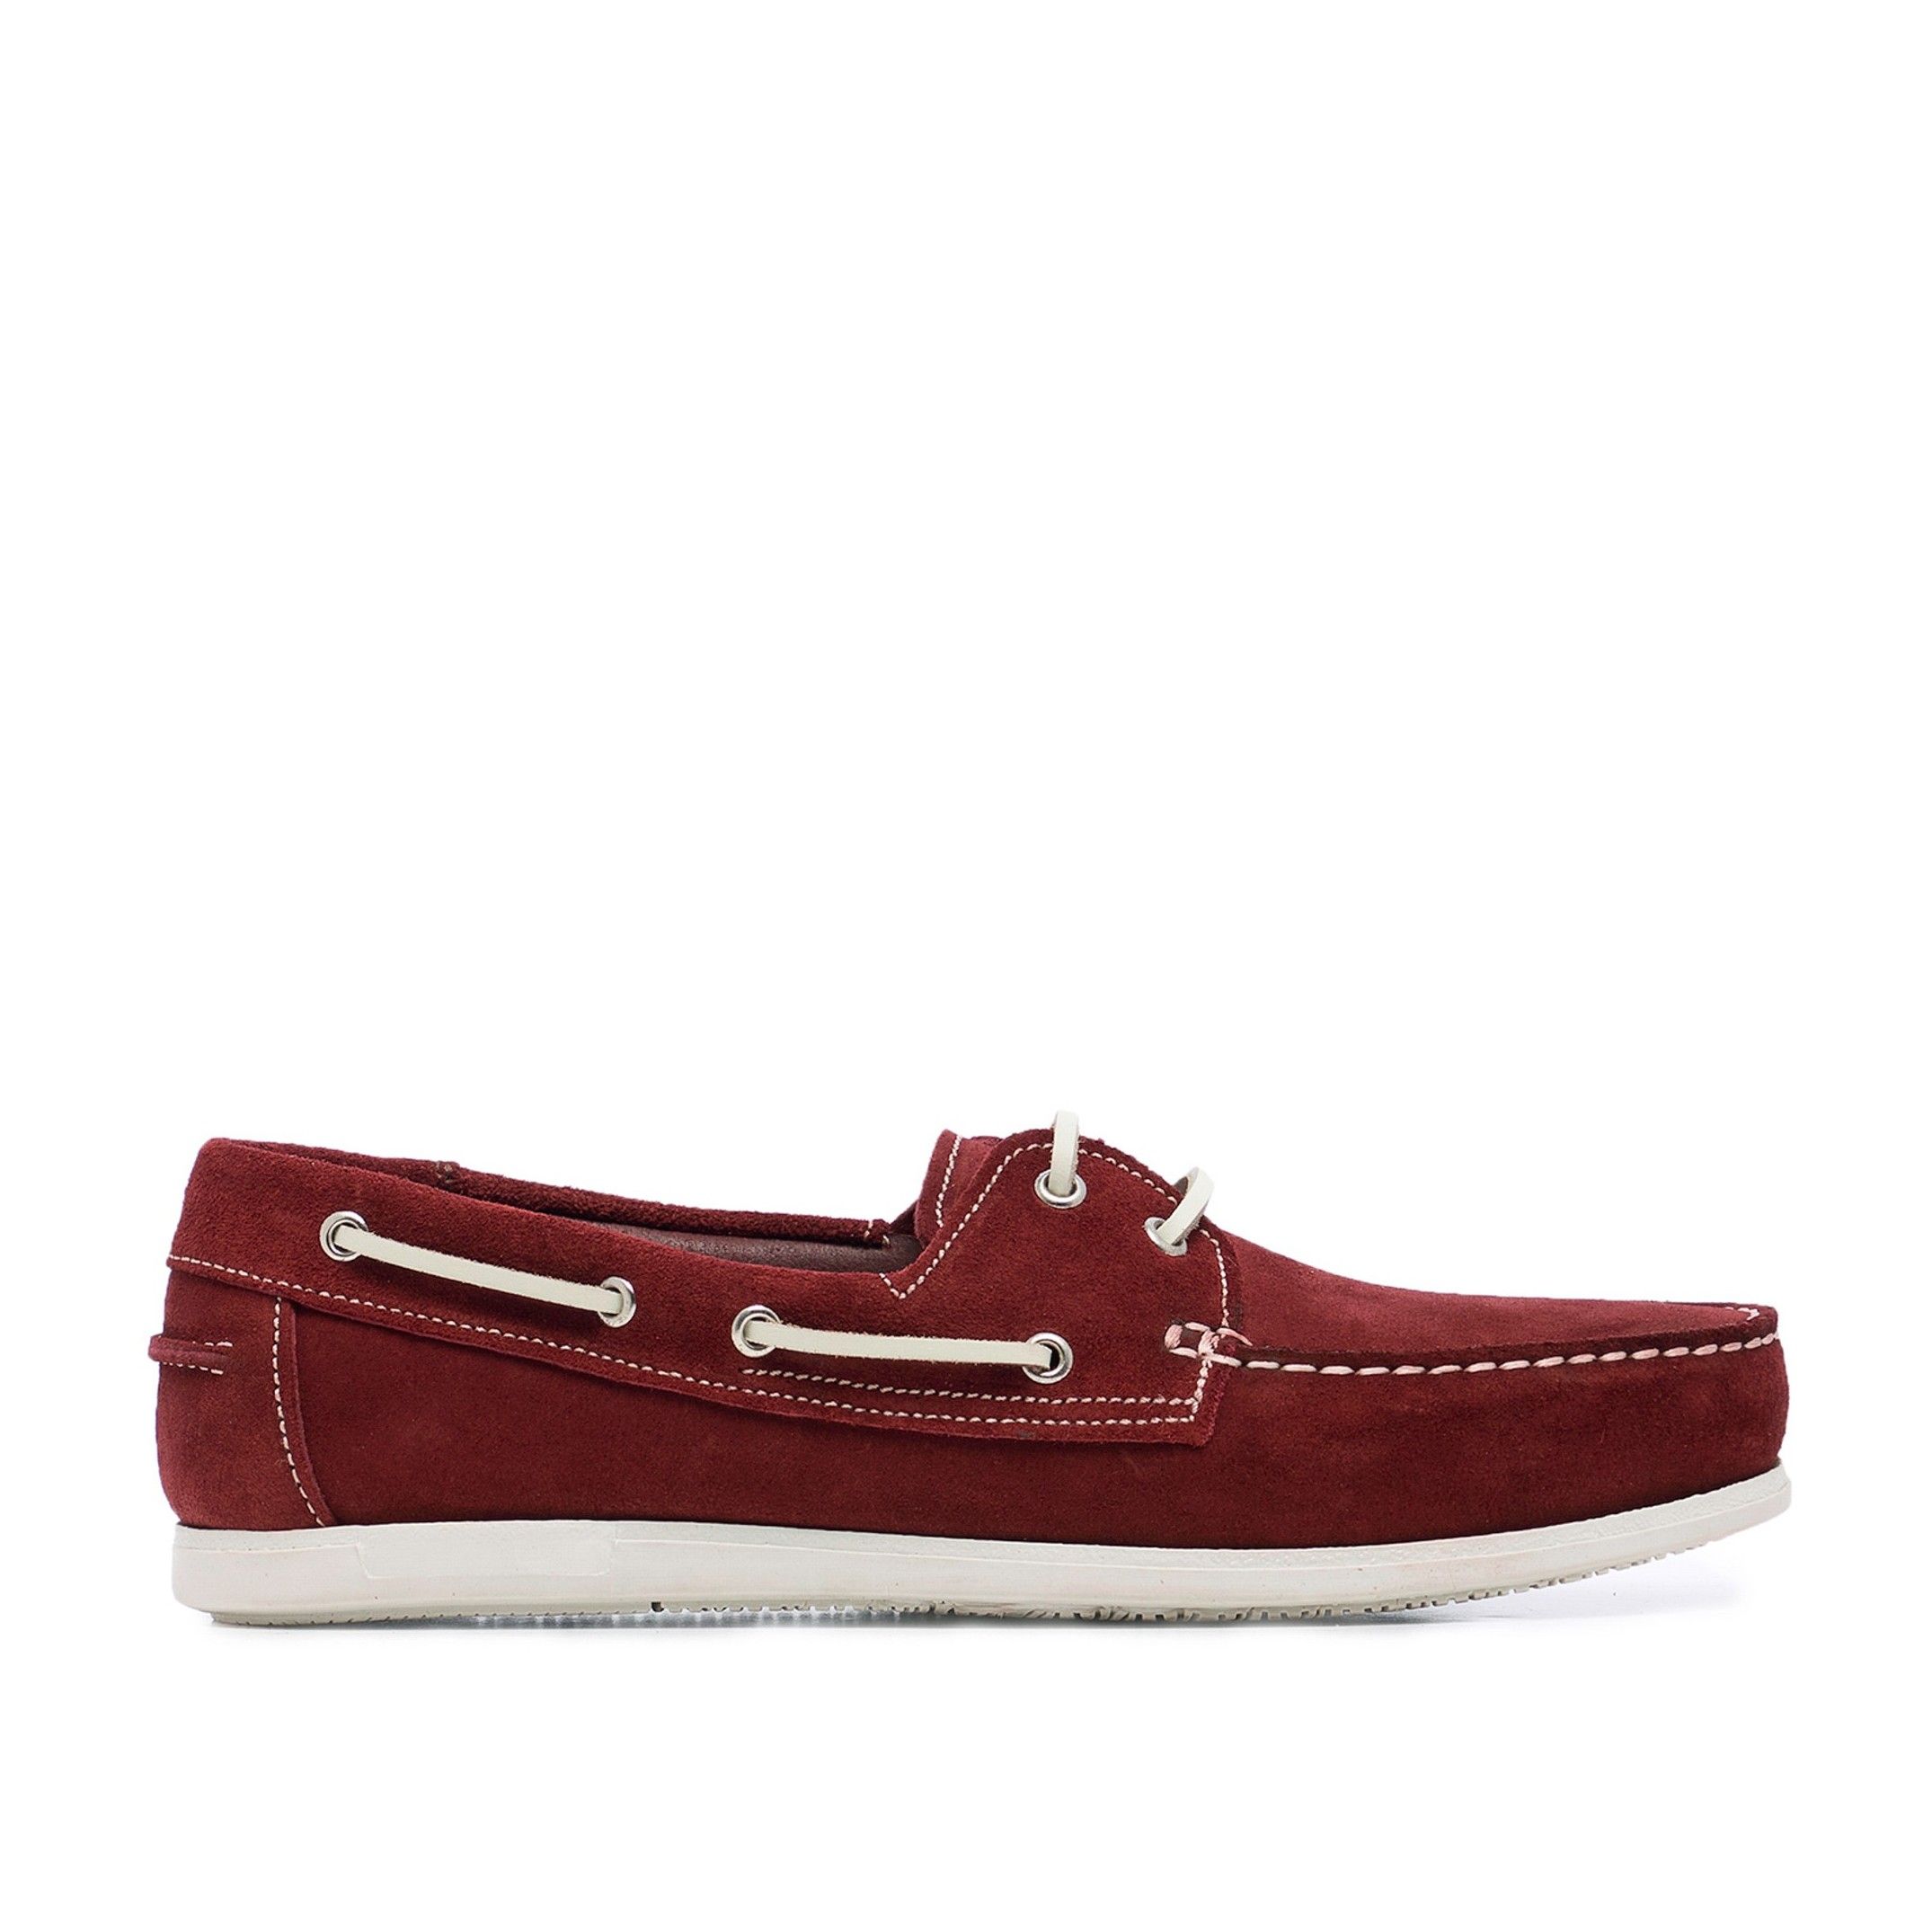 Leather Boat Shoes for Men